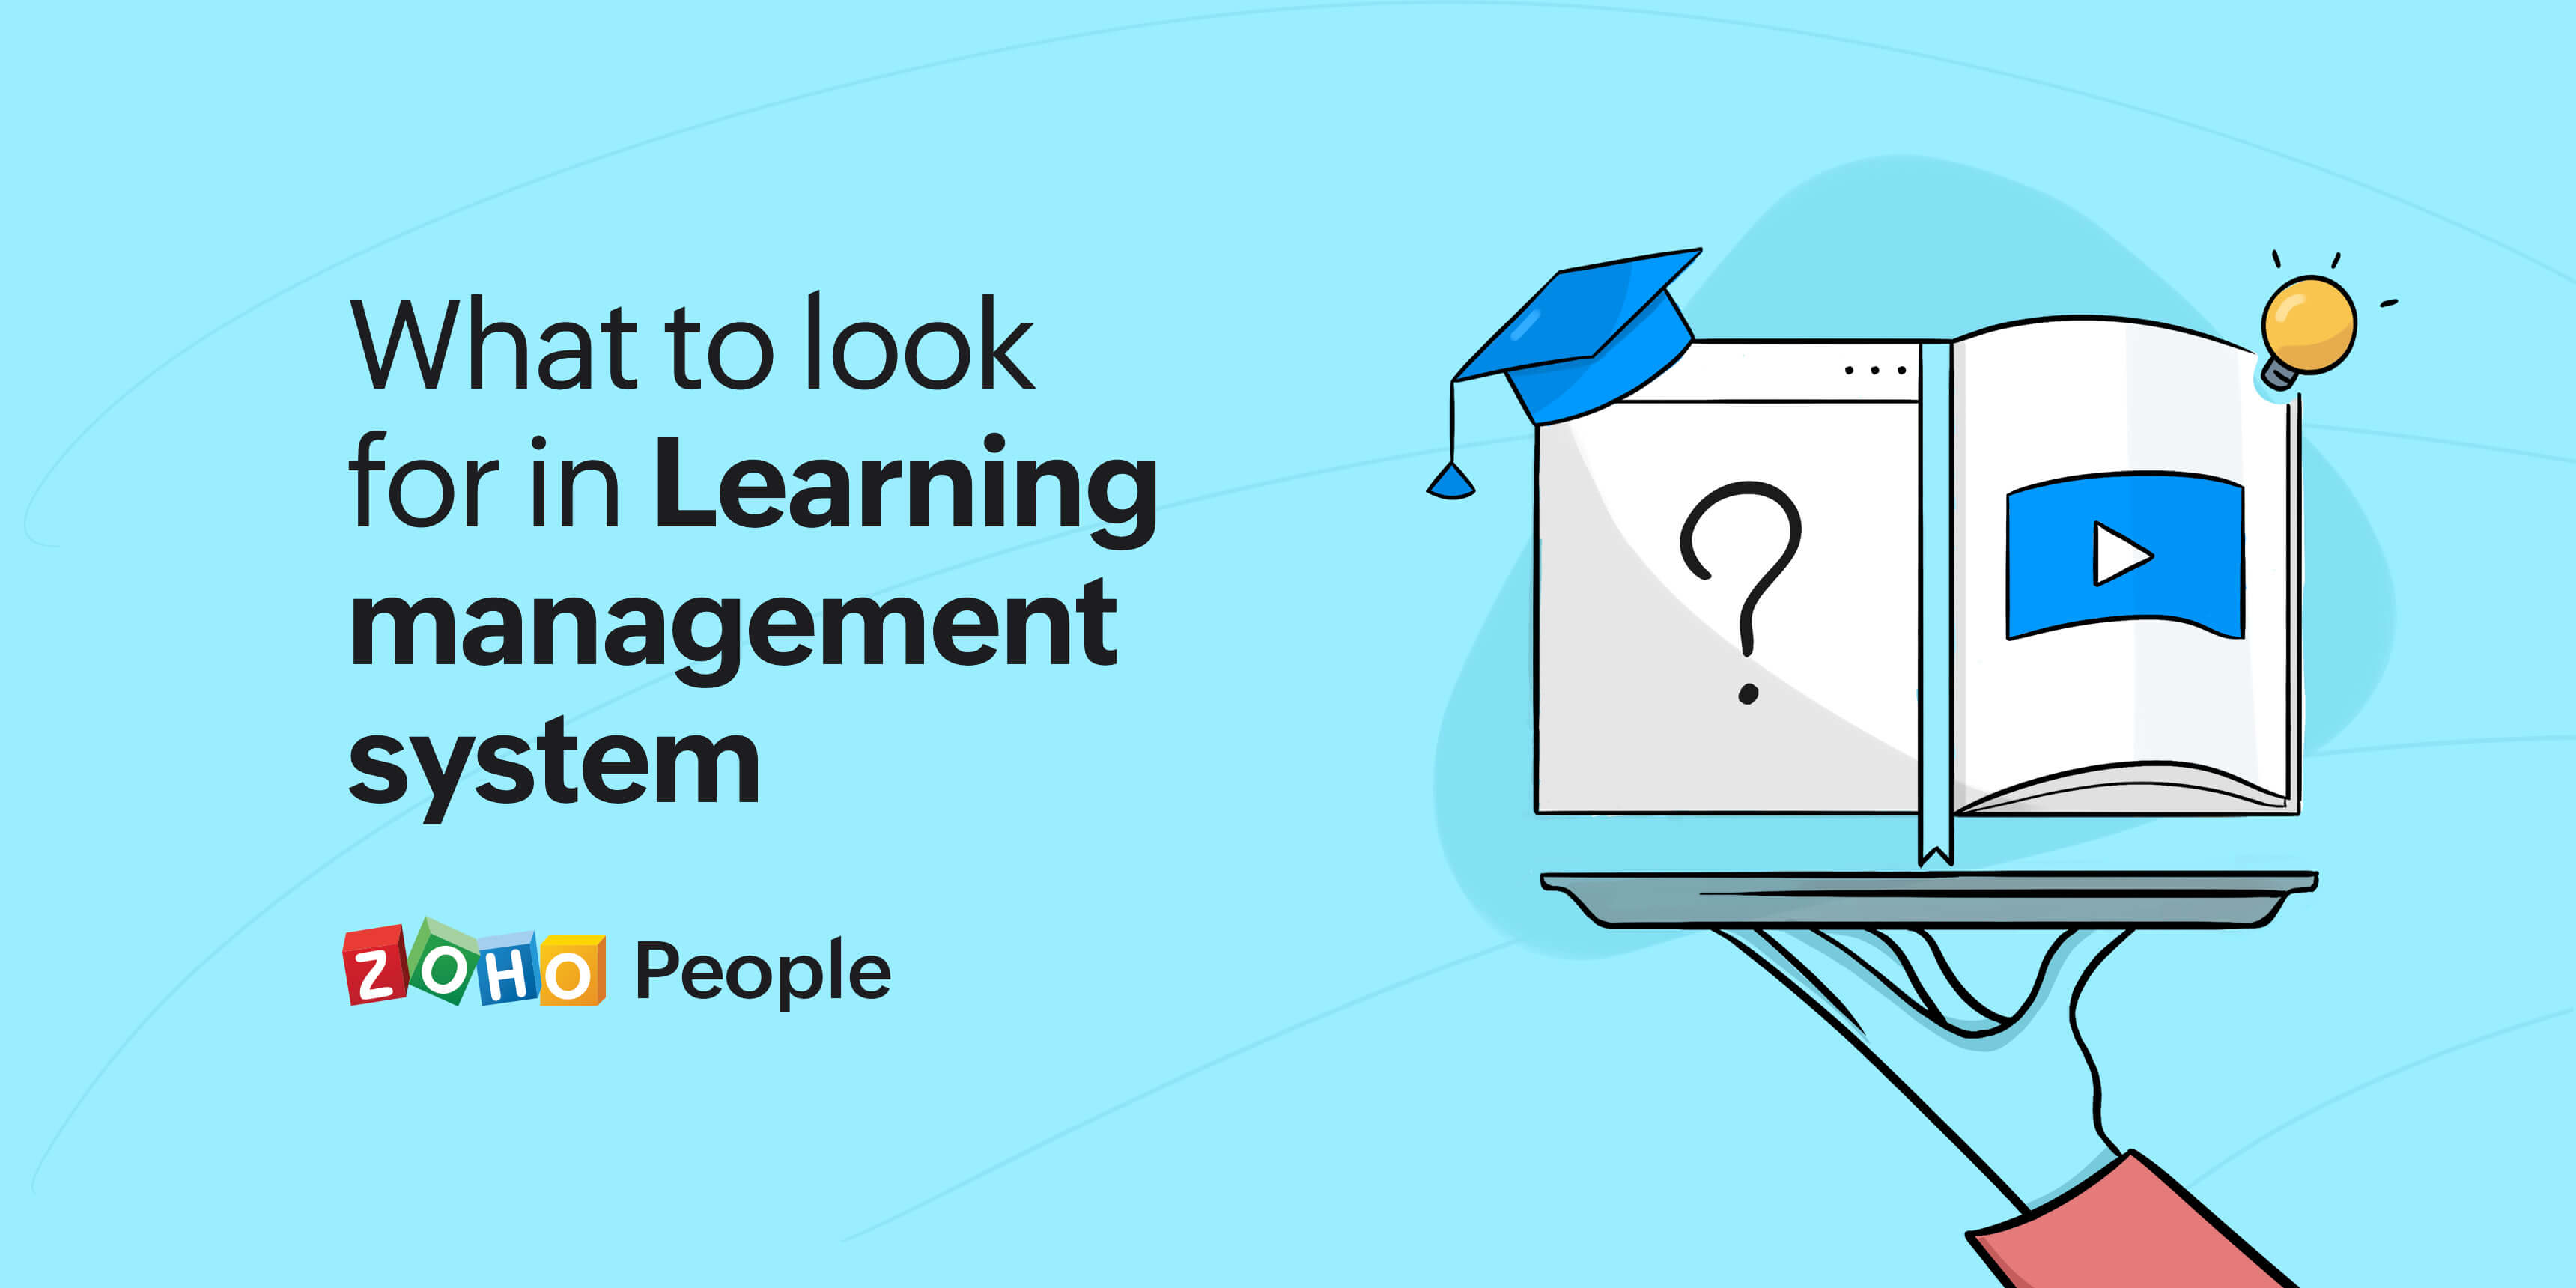 HR tech basics: Here are the 5 features you should look for in a learning management system